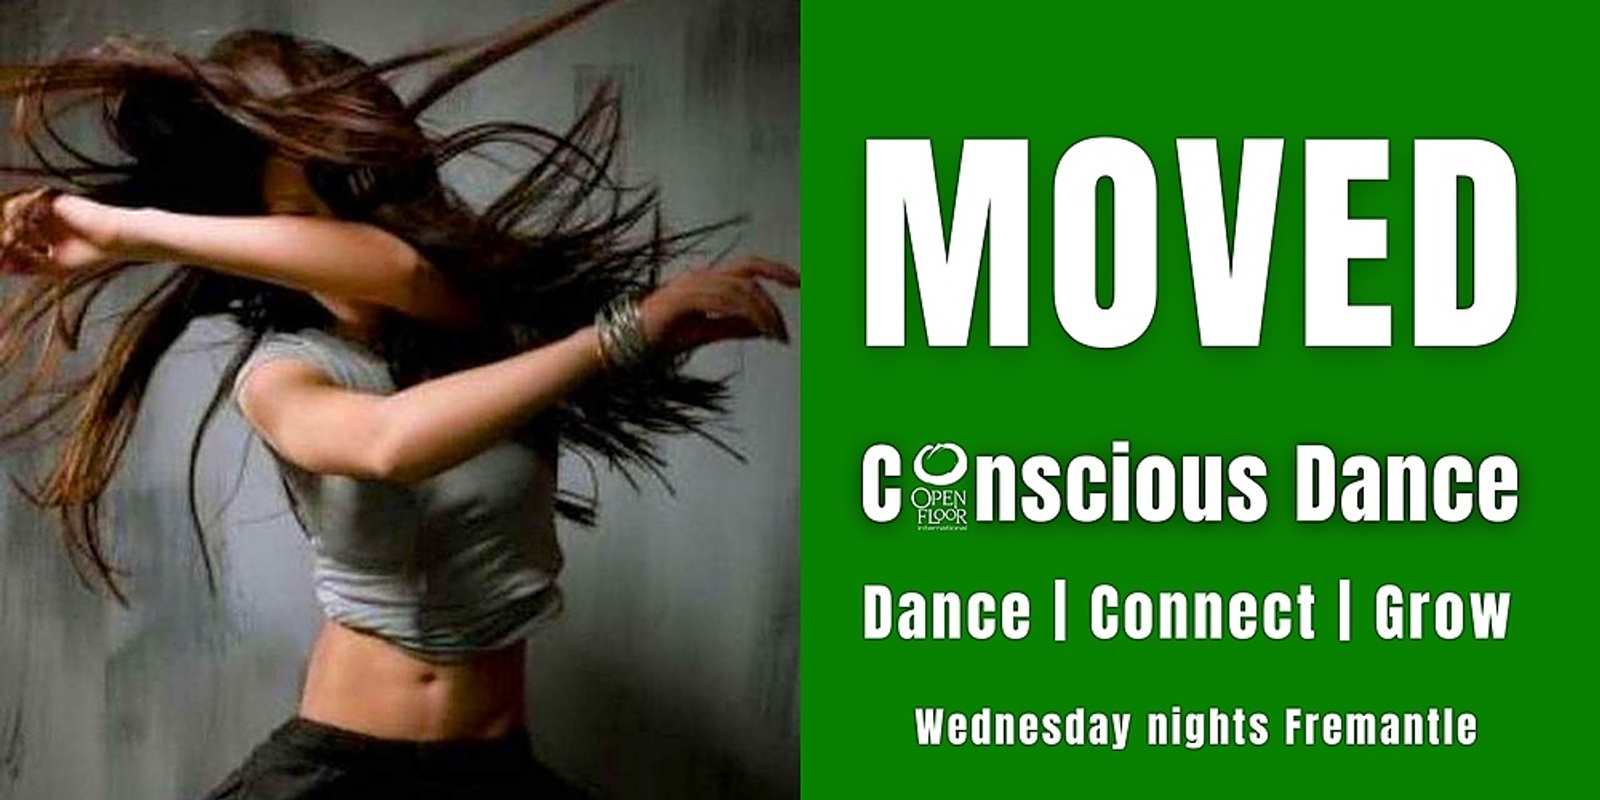 MOVED - Conscious Dance - June 14th